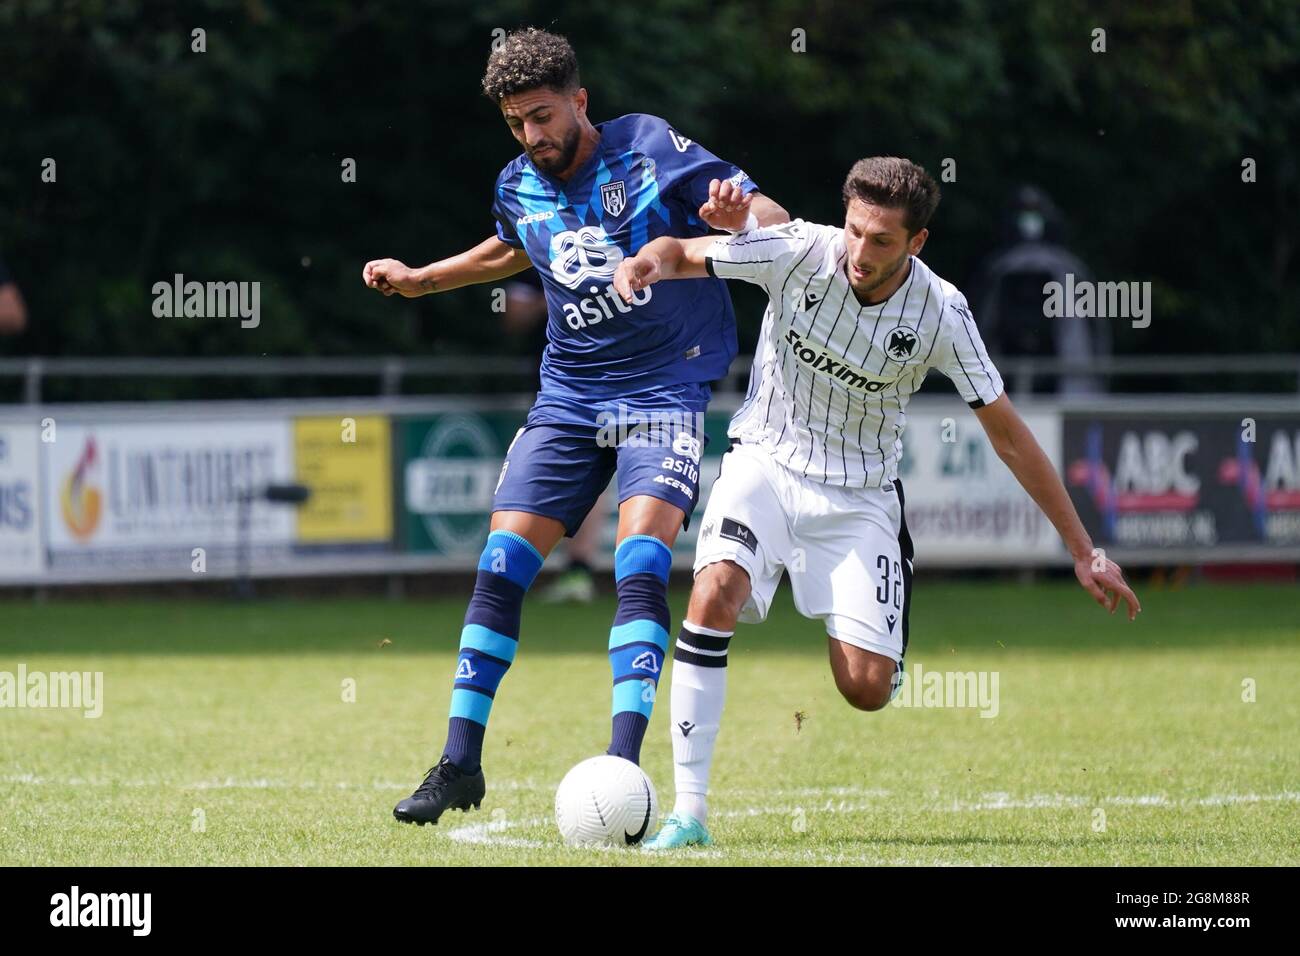 Apeldoorn, Netherlands. 21st July, 2021. APELDOORN, NETHERLANDS - JULY 21:  Bilal Basacikoglu of Heracles Almelo, Nika Ninua of PAOK FC during the  Pre-season Friendly match between Heracles Almelo and PAOK Saloniki on